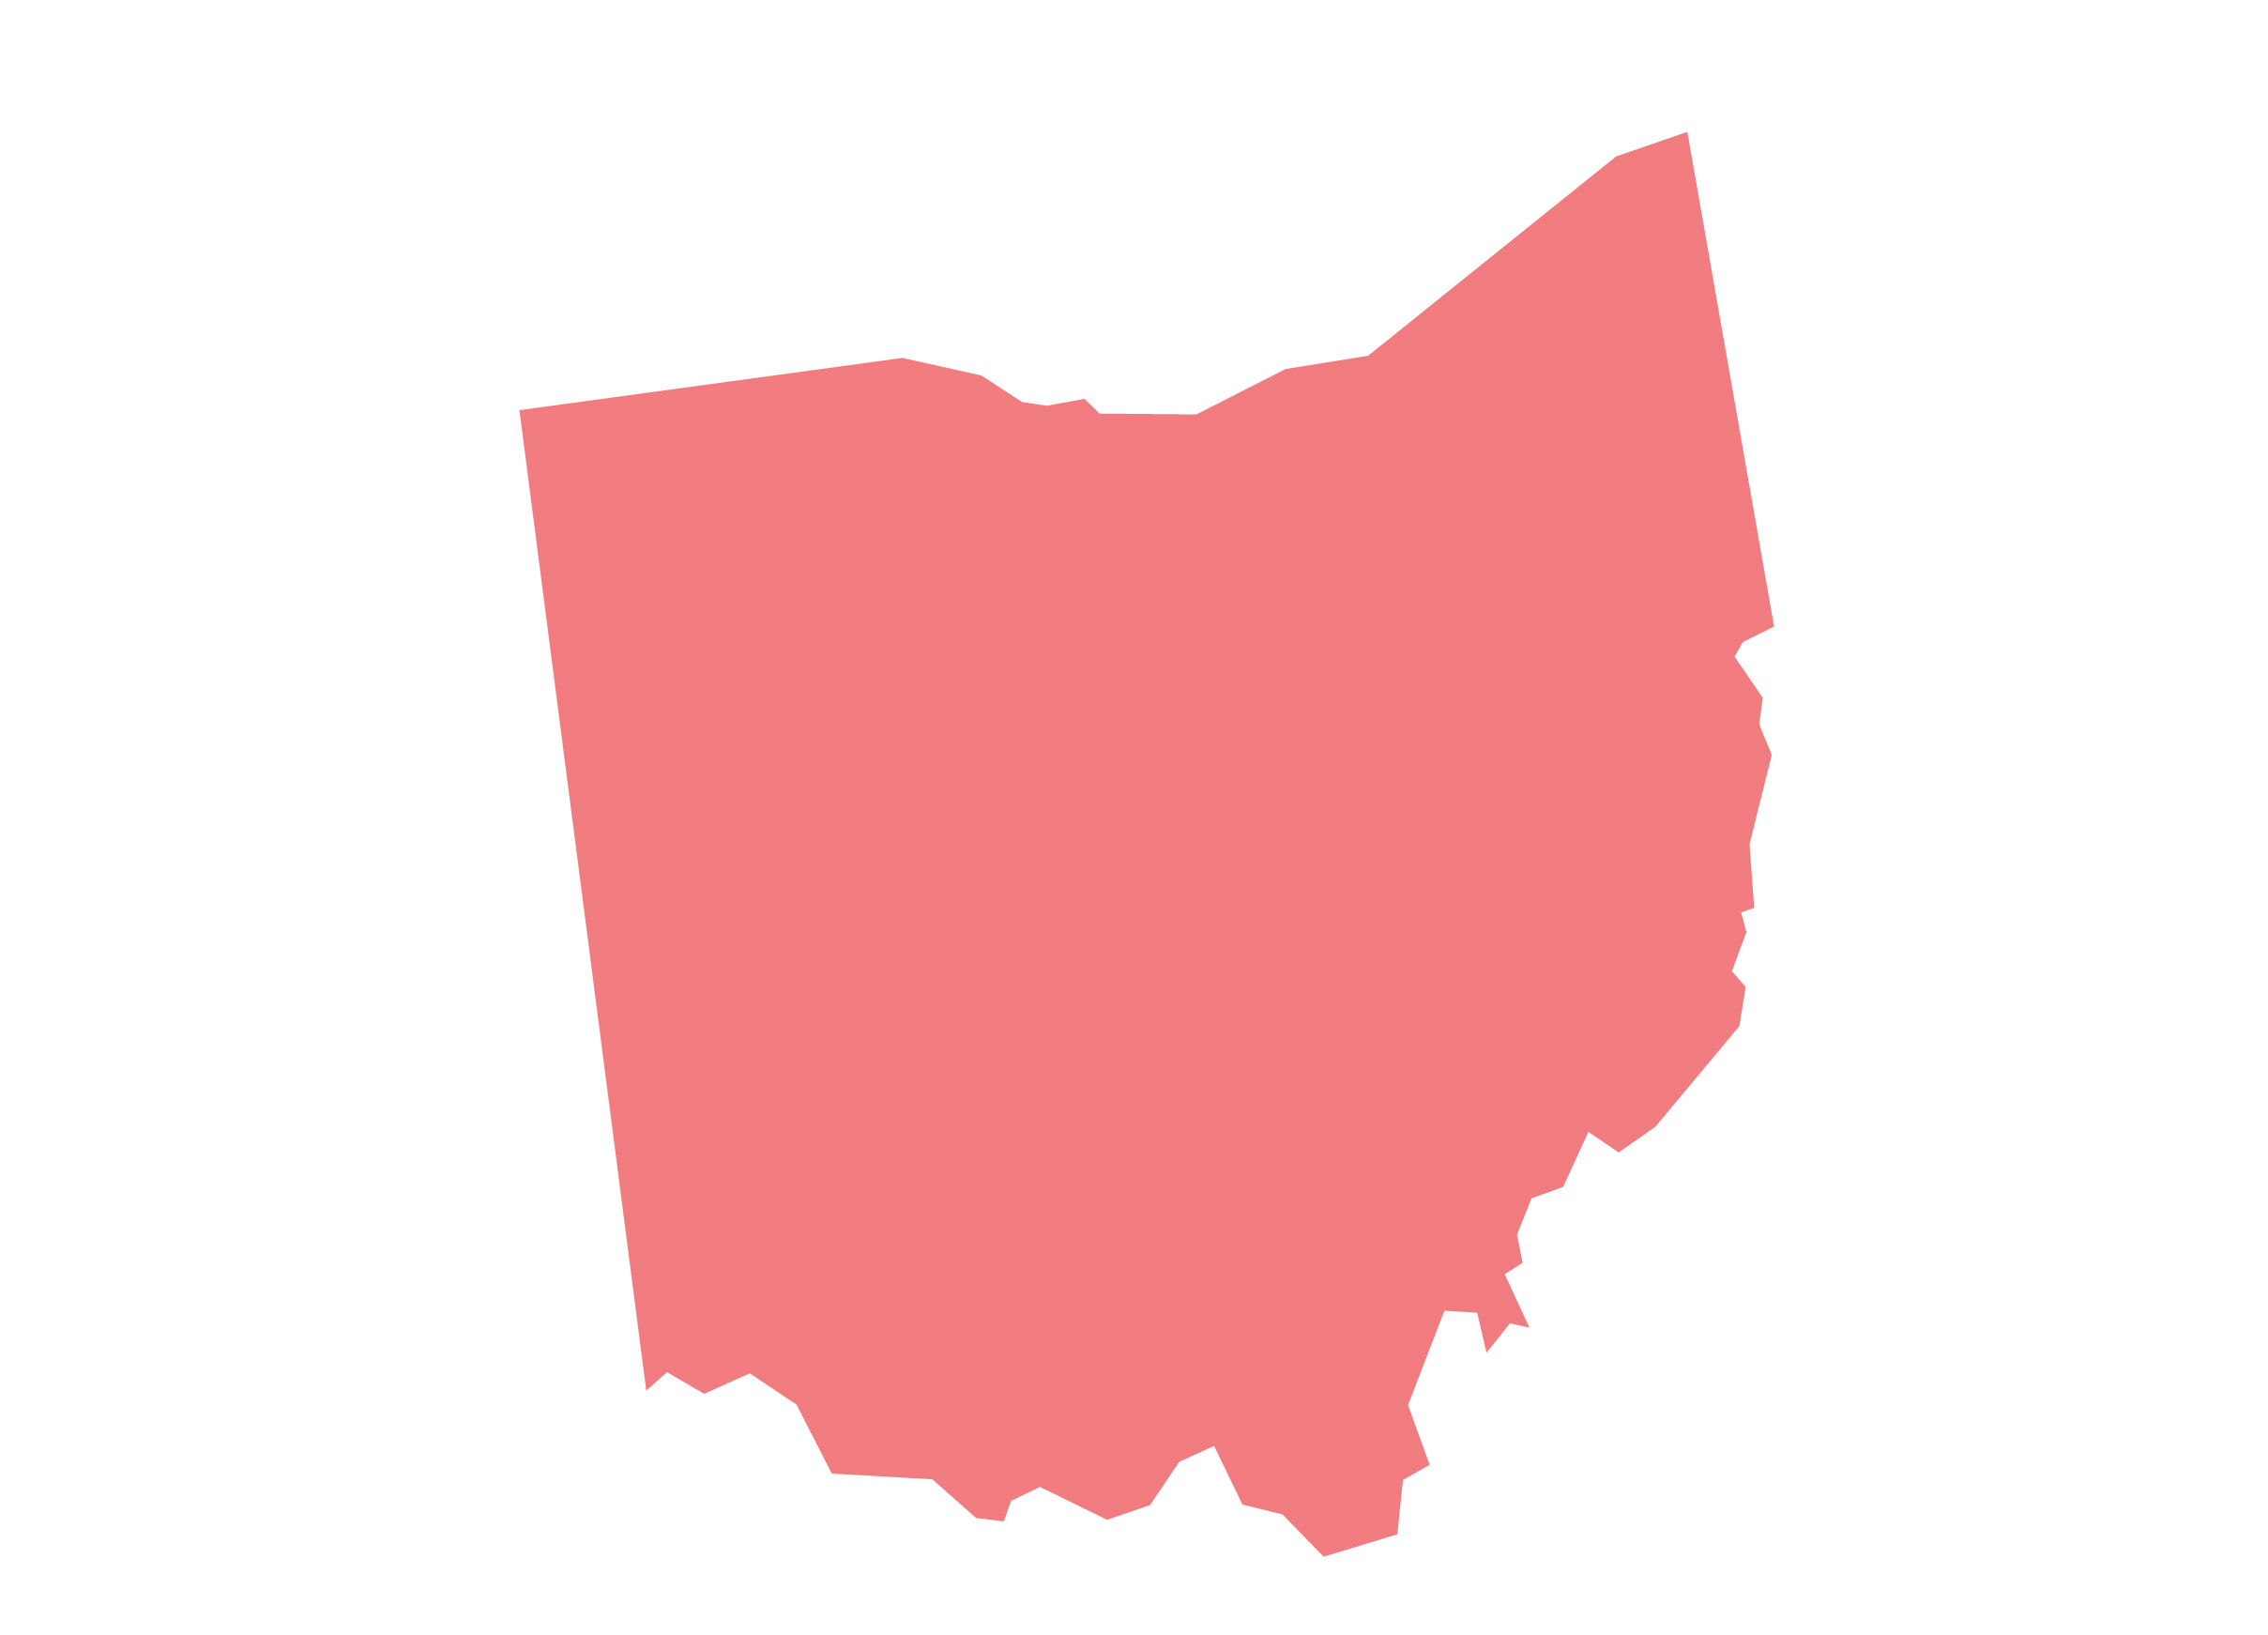 The shape of the state of Ohio